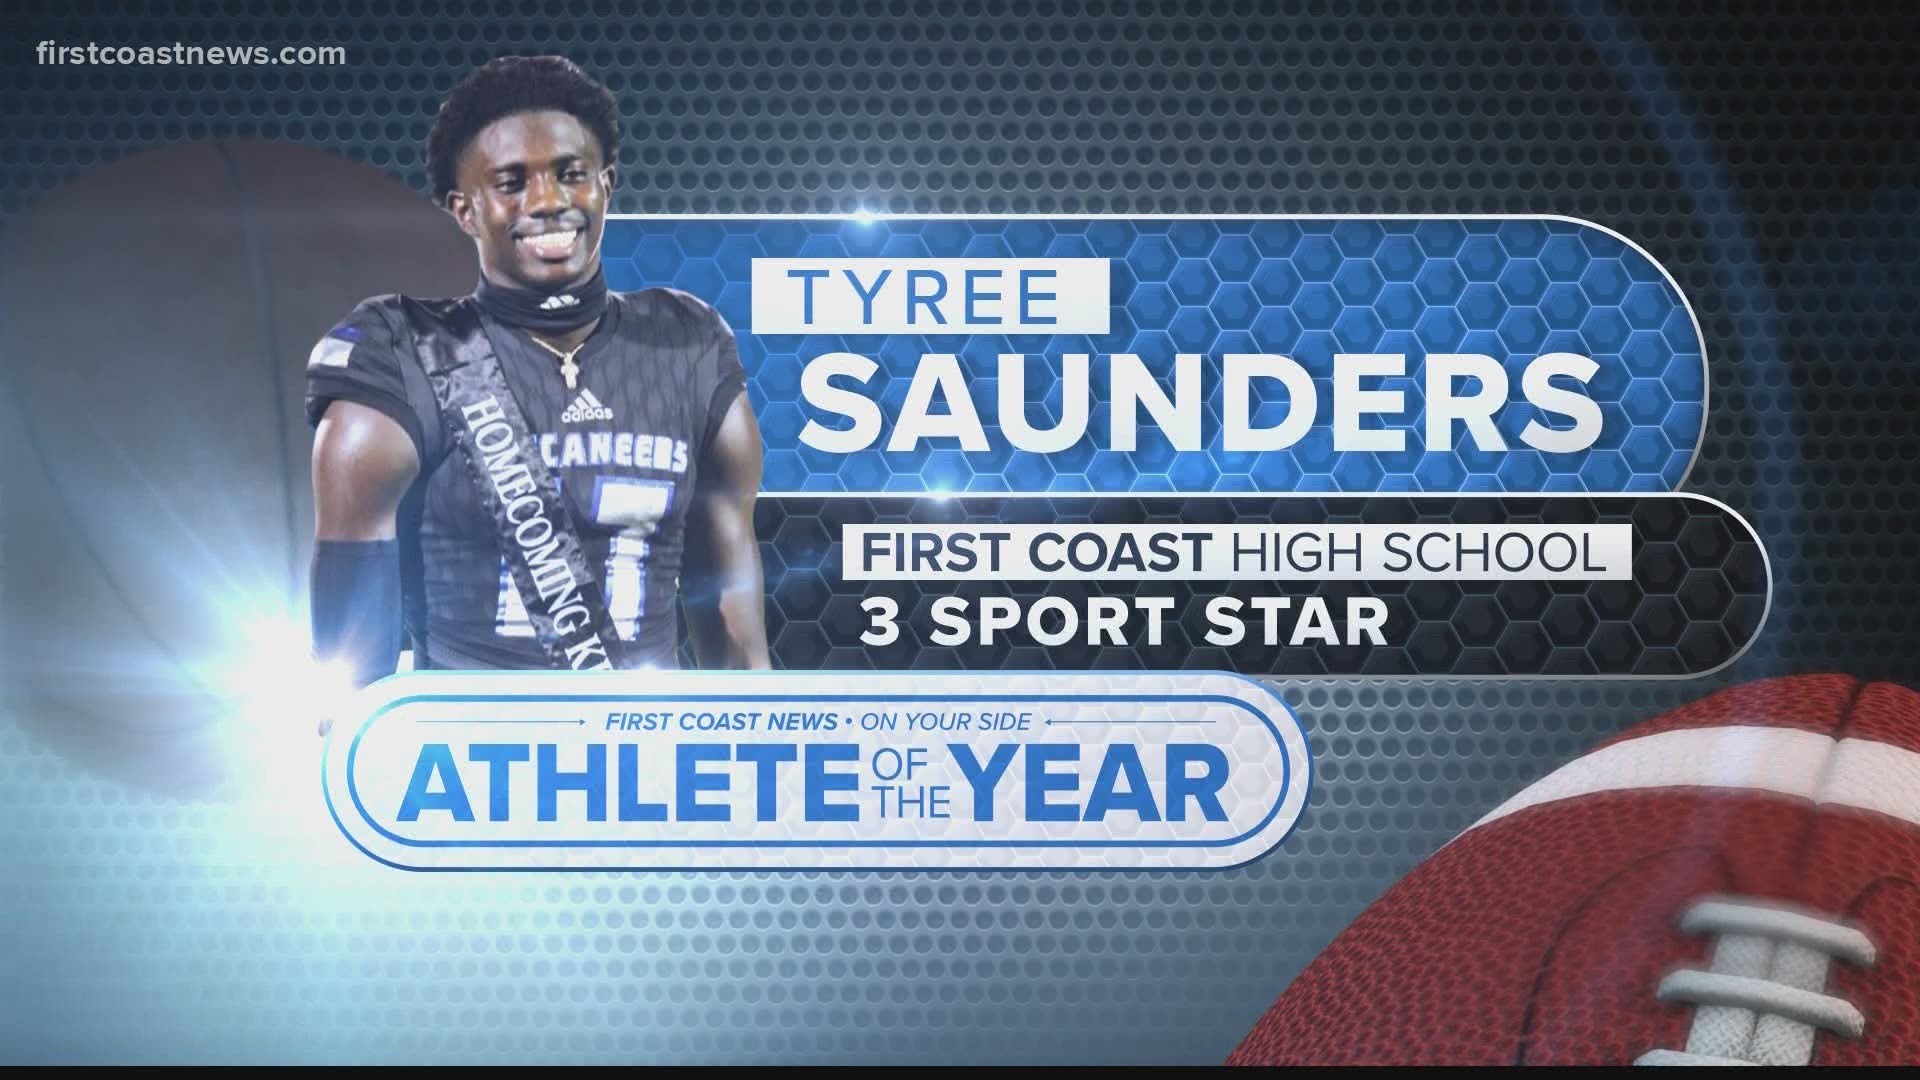 Congratulations to First Coast High's Tyree Saunders, this year's FCN Athlete of the Year!